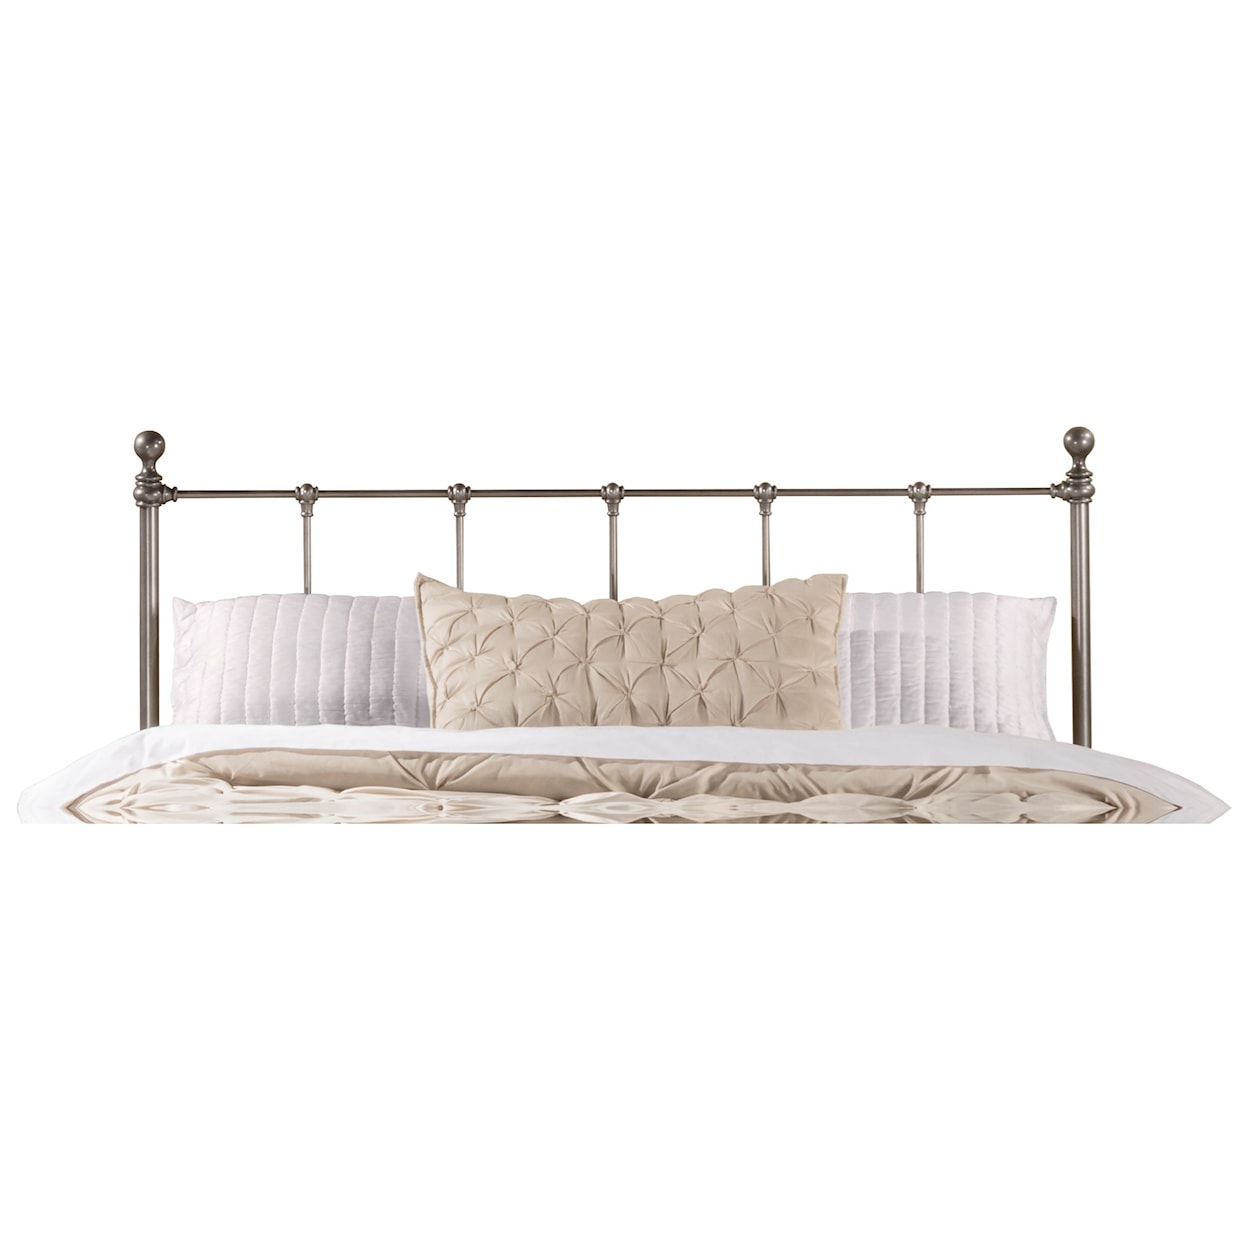 Hillsdale Metal Beds Full Headboard with Frame